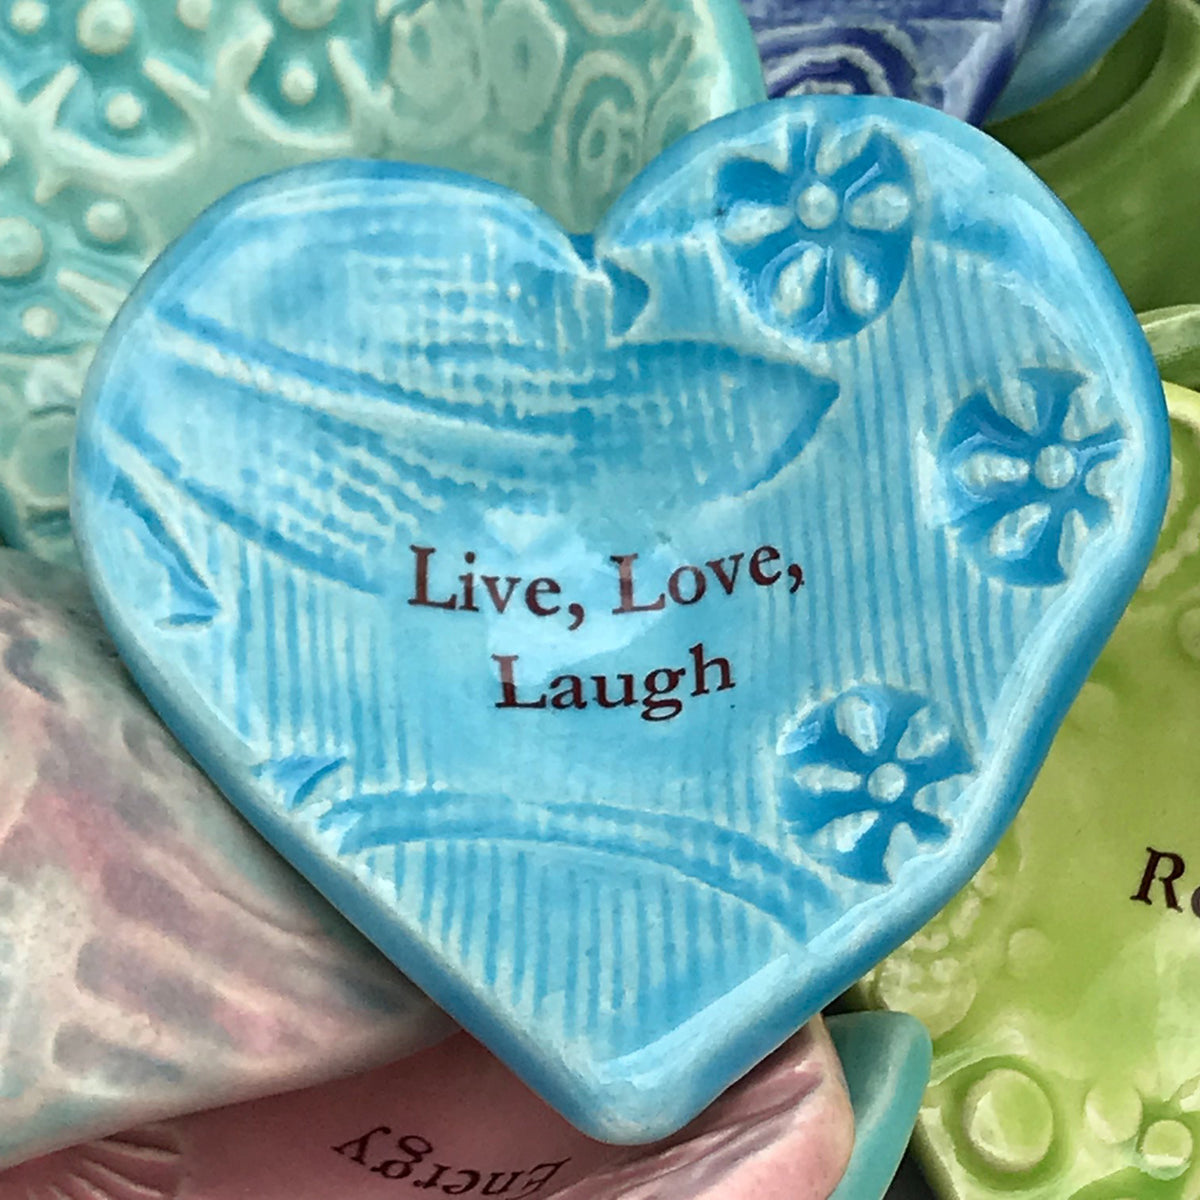 Giving Heart "Live, Love, Laugh